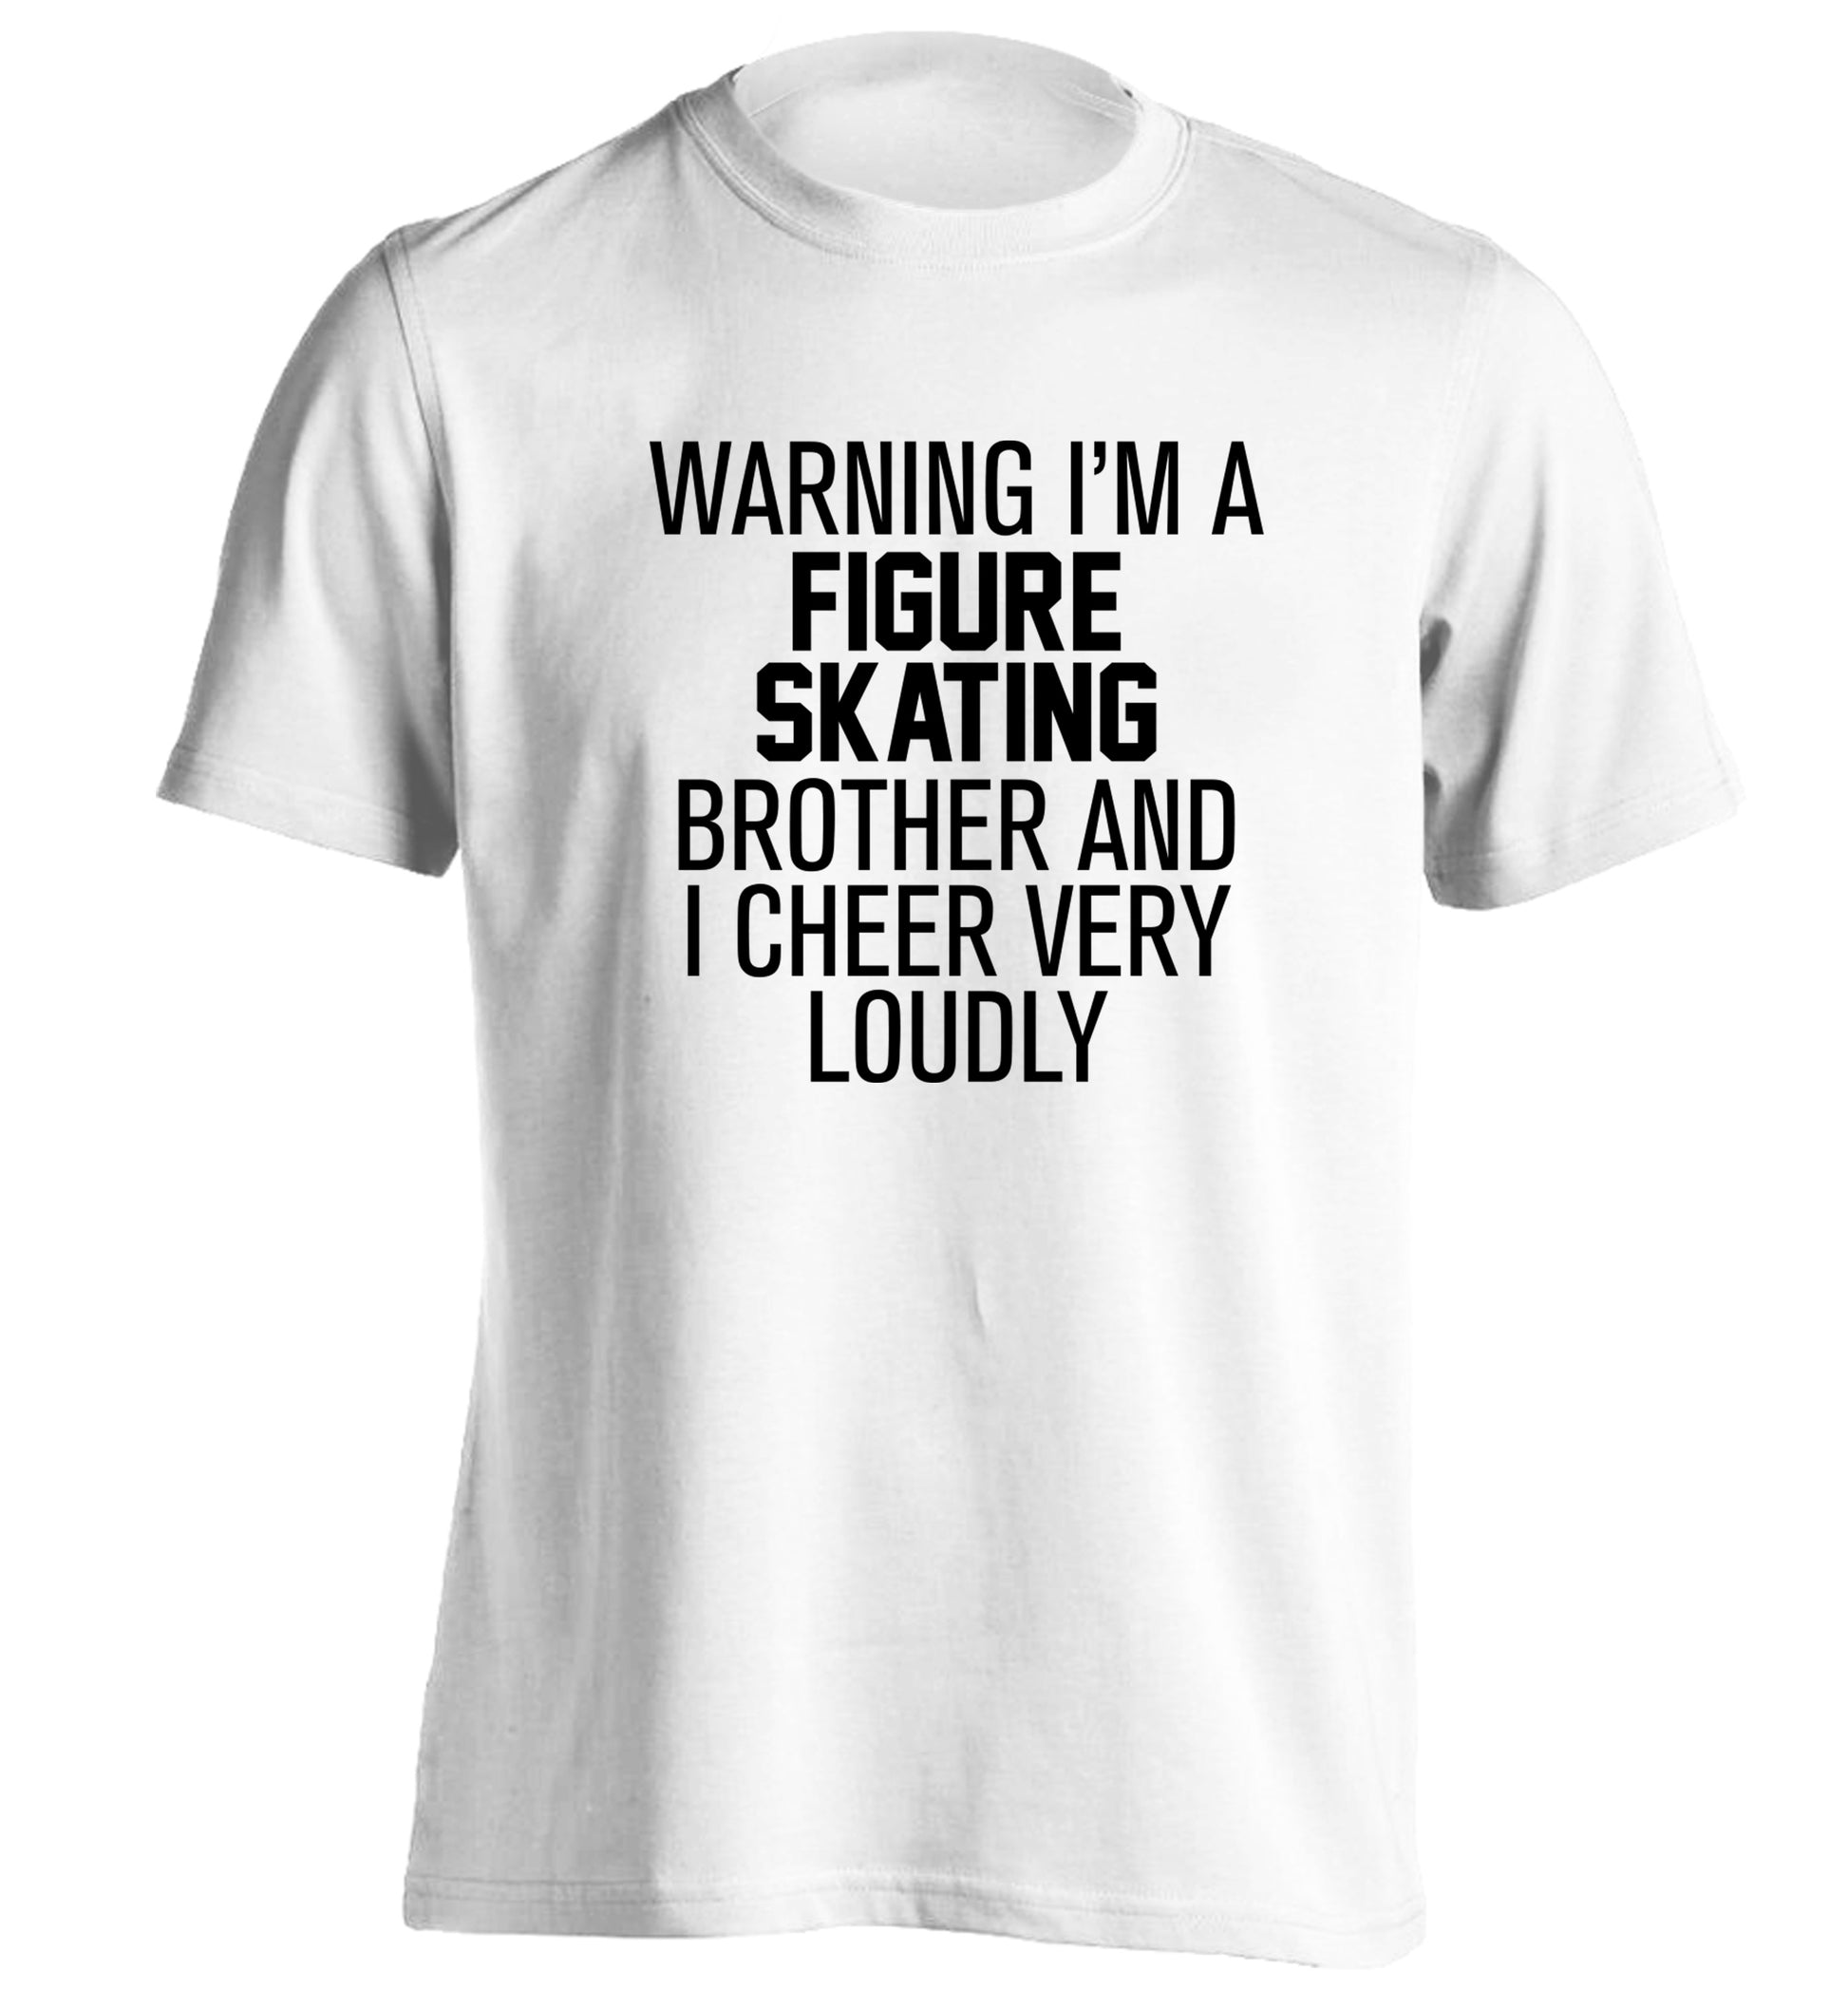 Warning I'm a figure skating brother and I cheer very loudly adults unisexwhite Tshirt 2XL